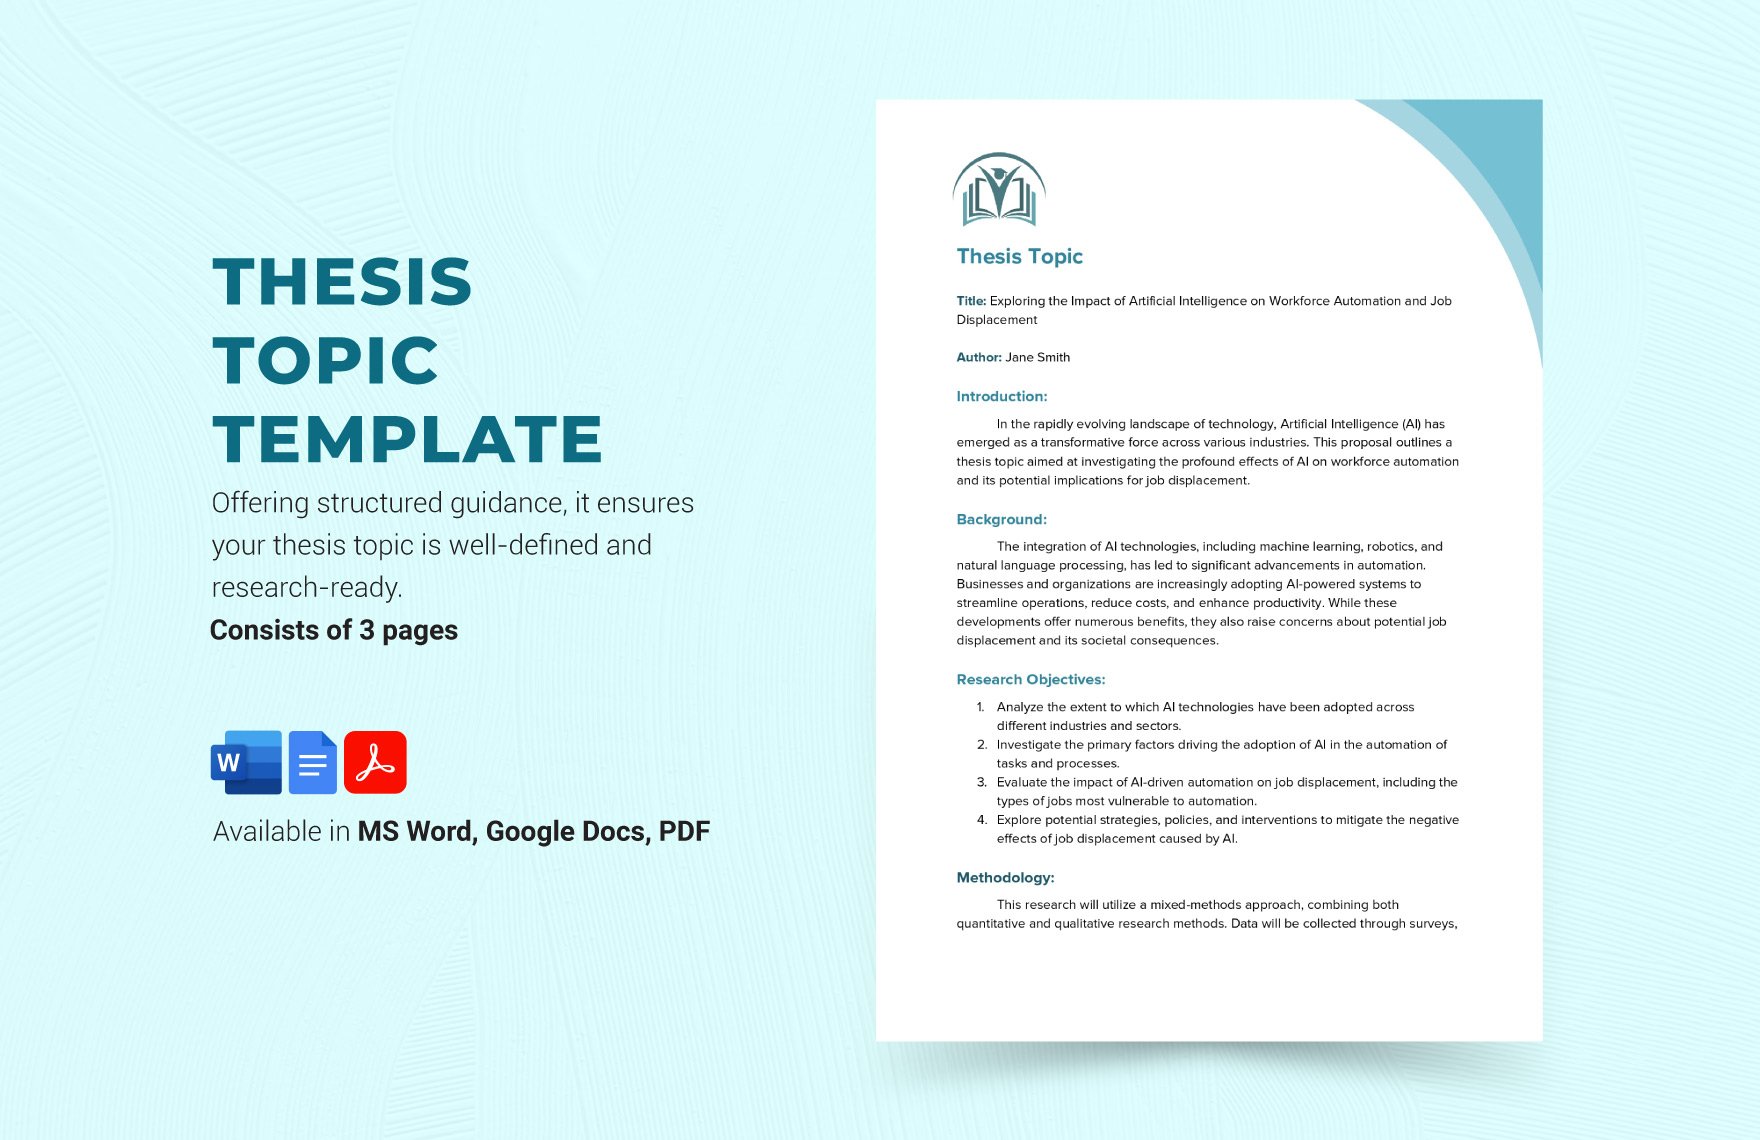 Thesis Topic Template in Word, Google Docs, PDF